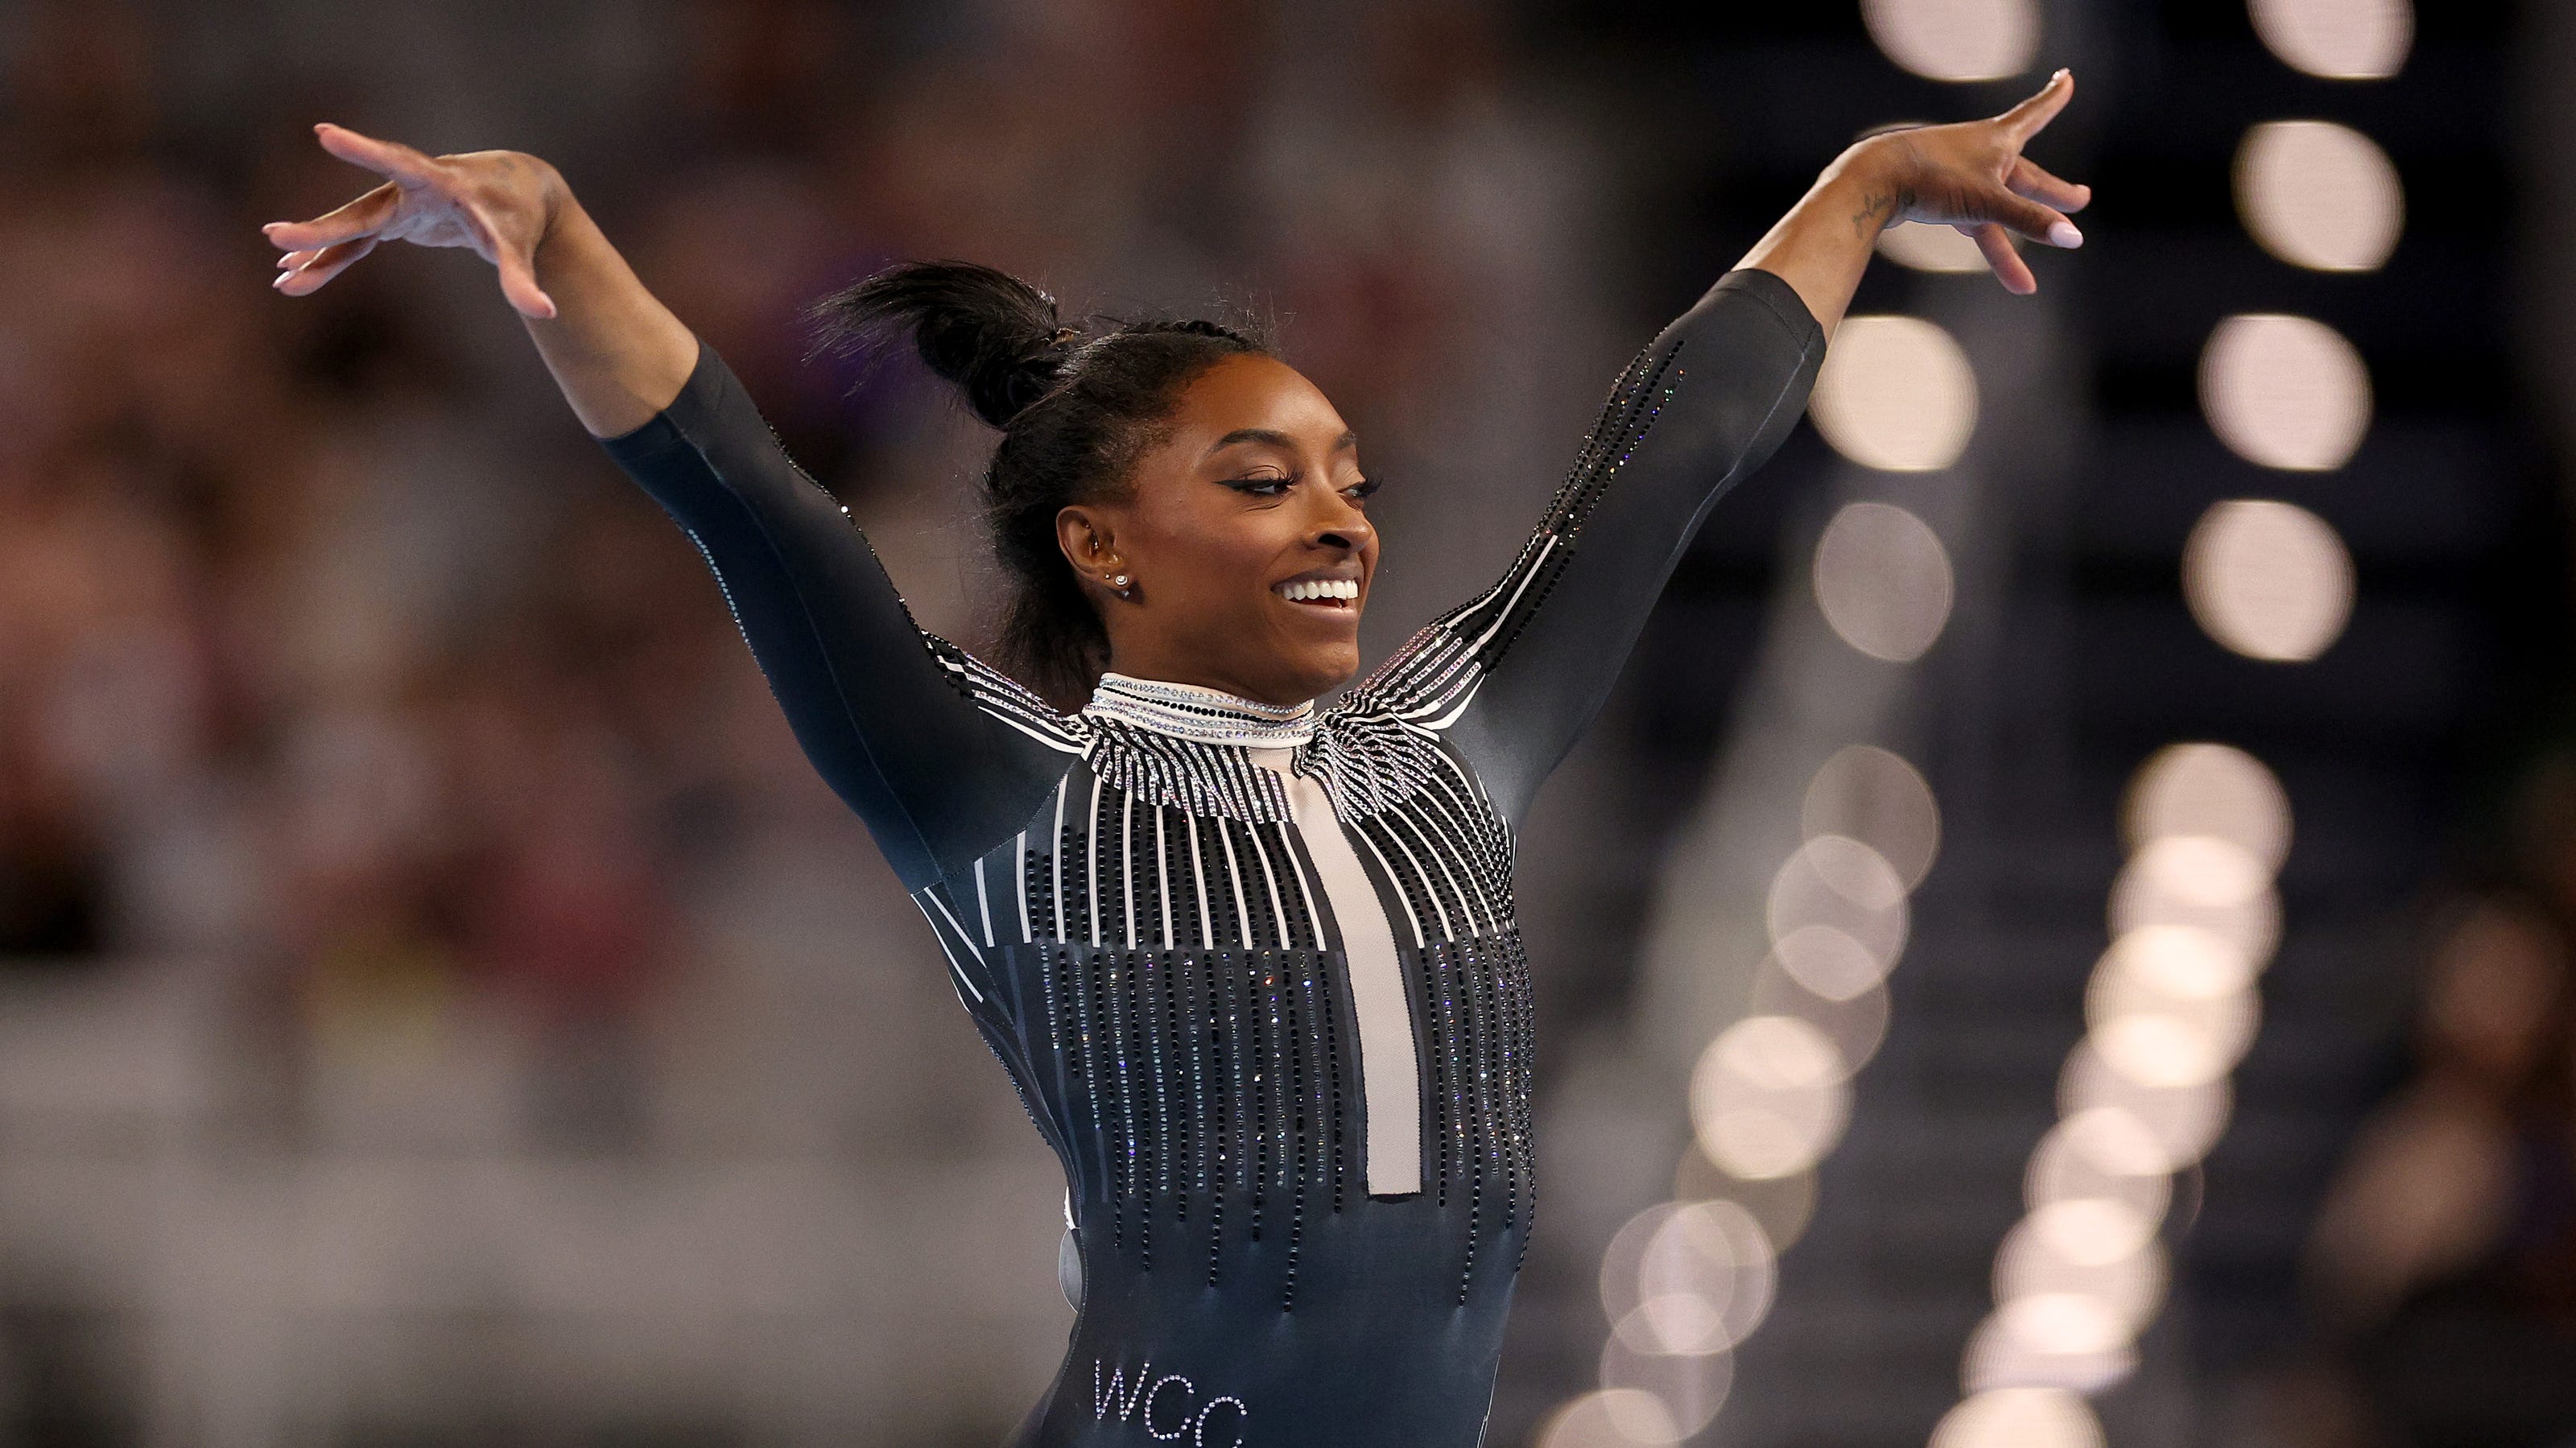 Don't take Simone Biles' greatness for granted. We must appreciate what she's (still) doing.